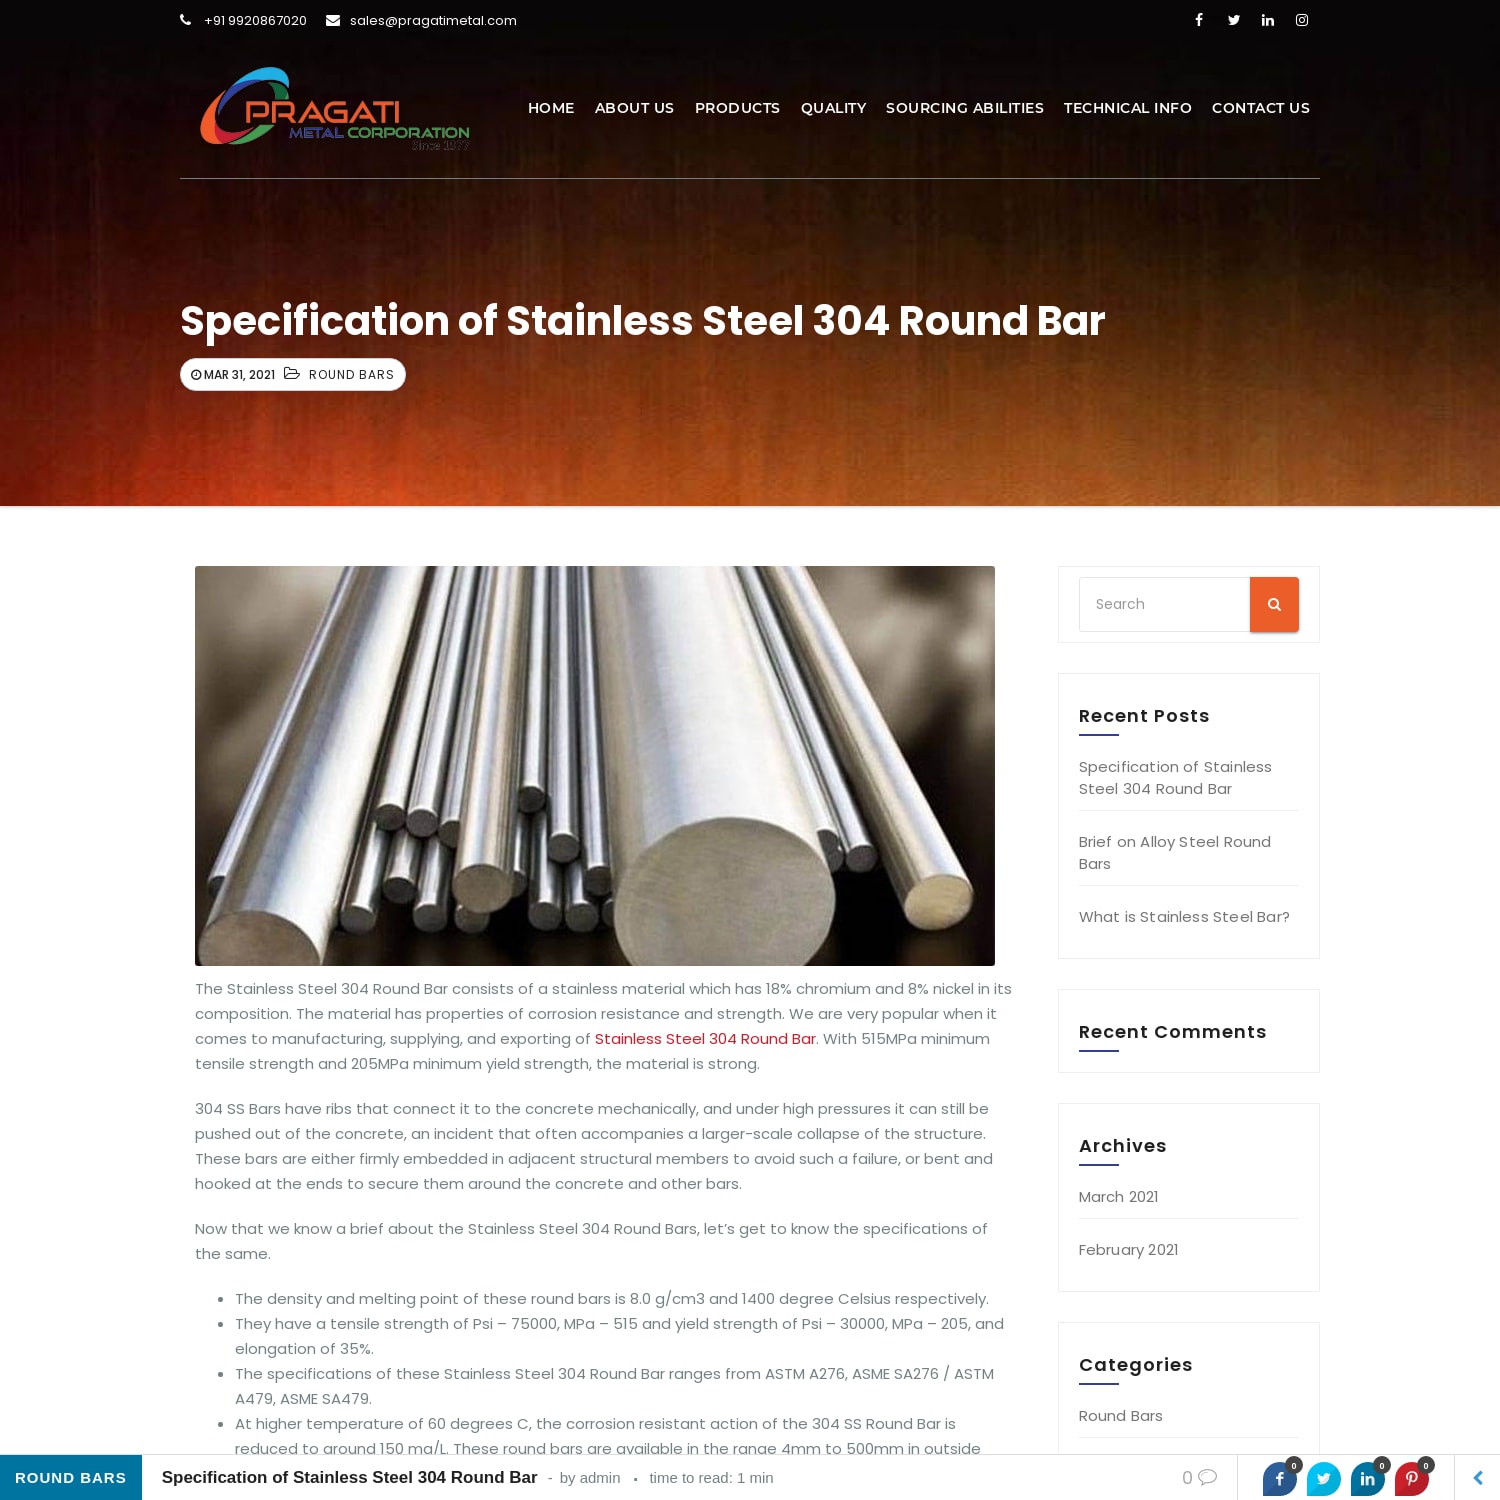 Specification of Stainless Steel 304 Round Bar